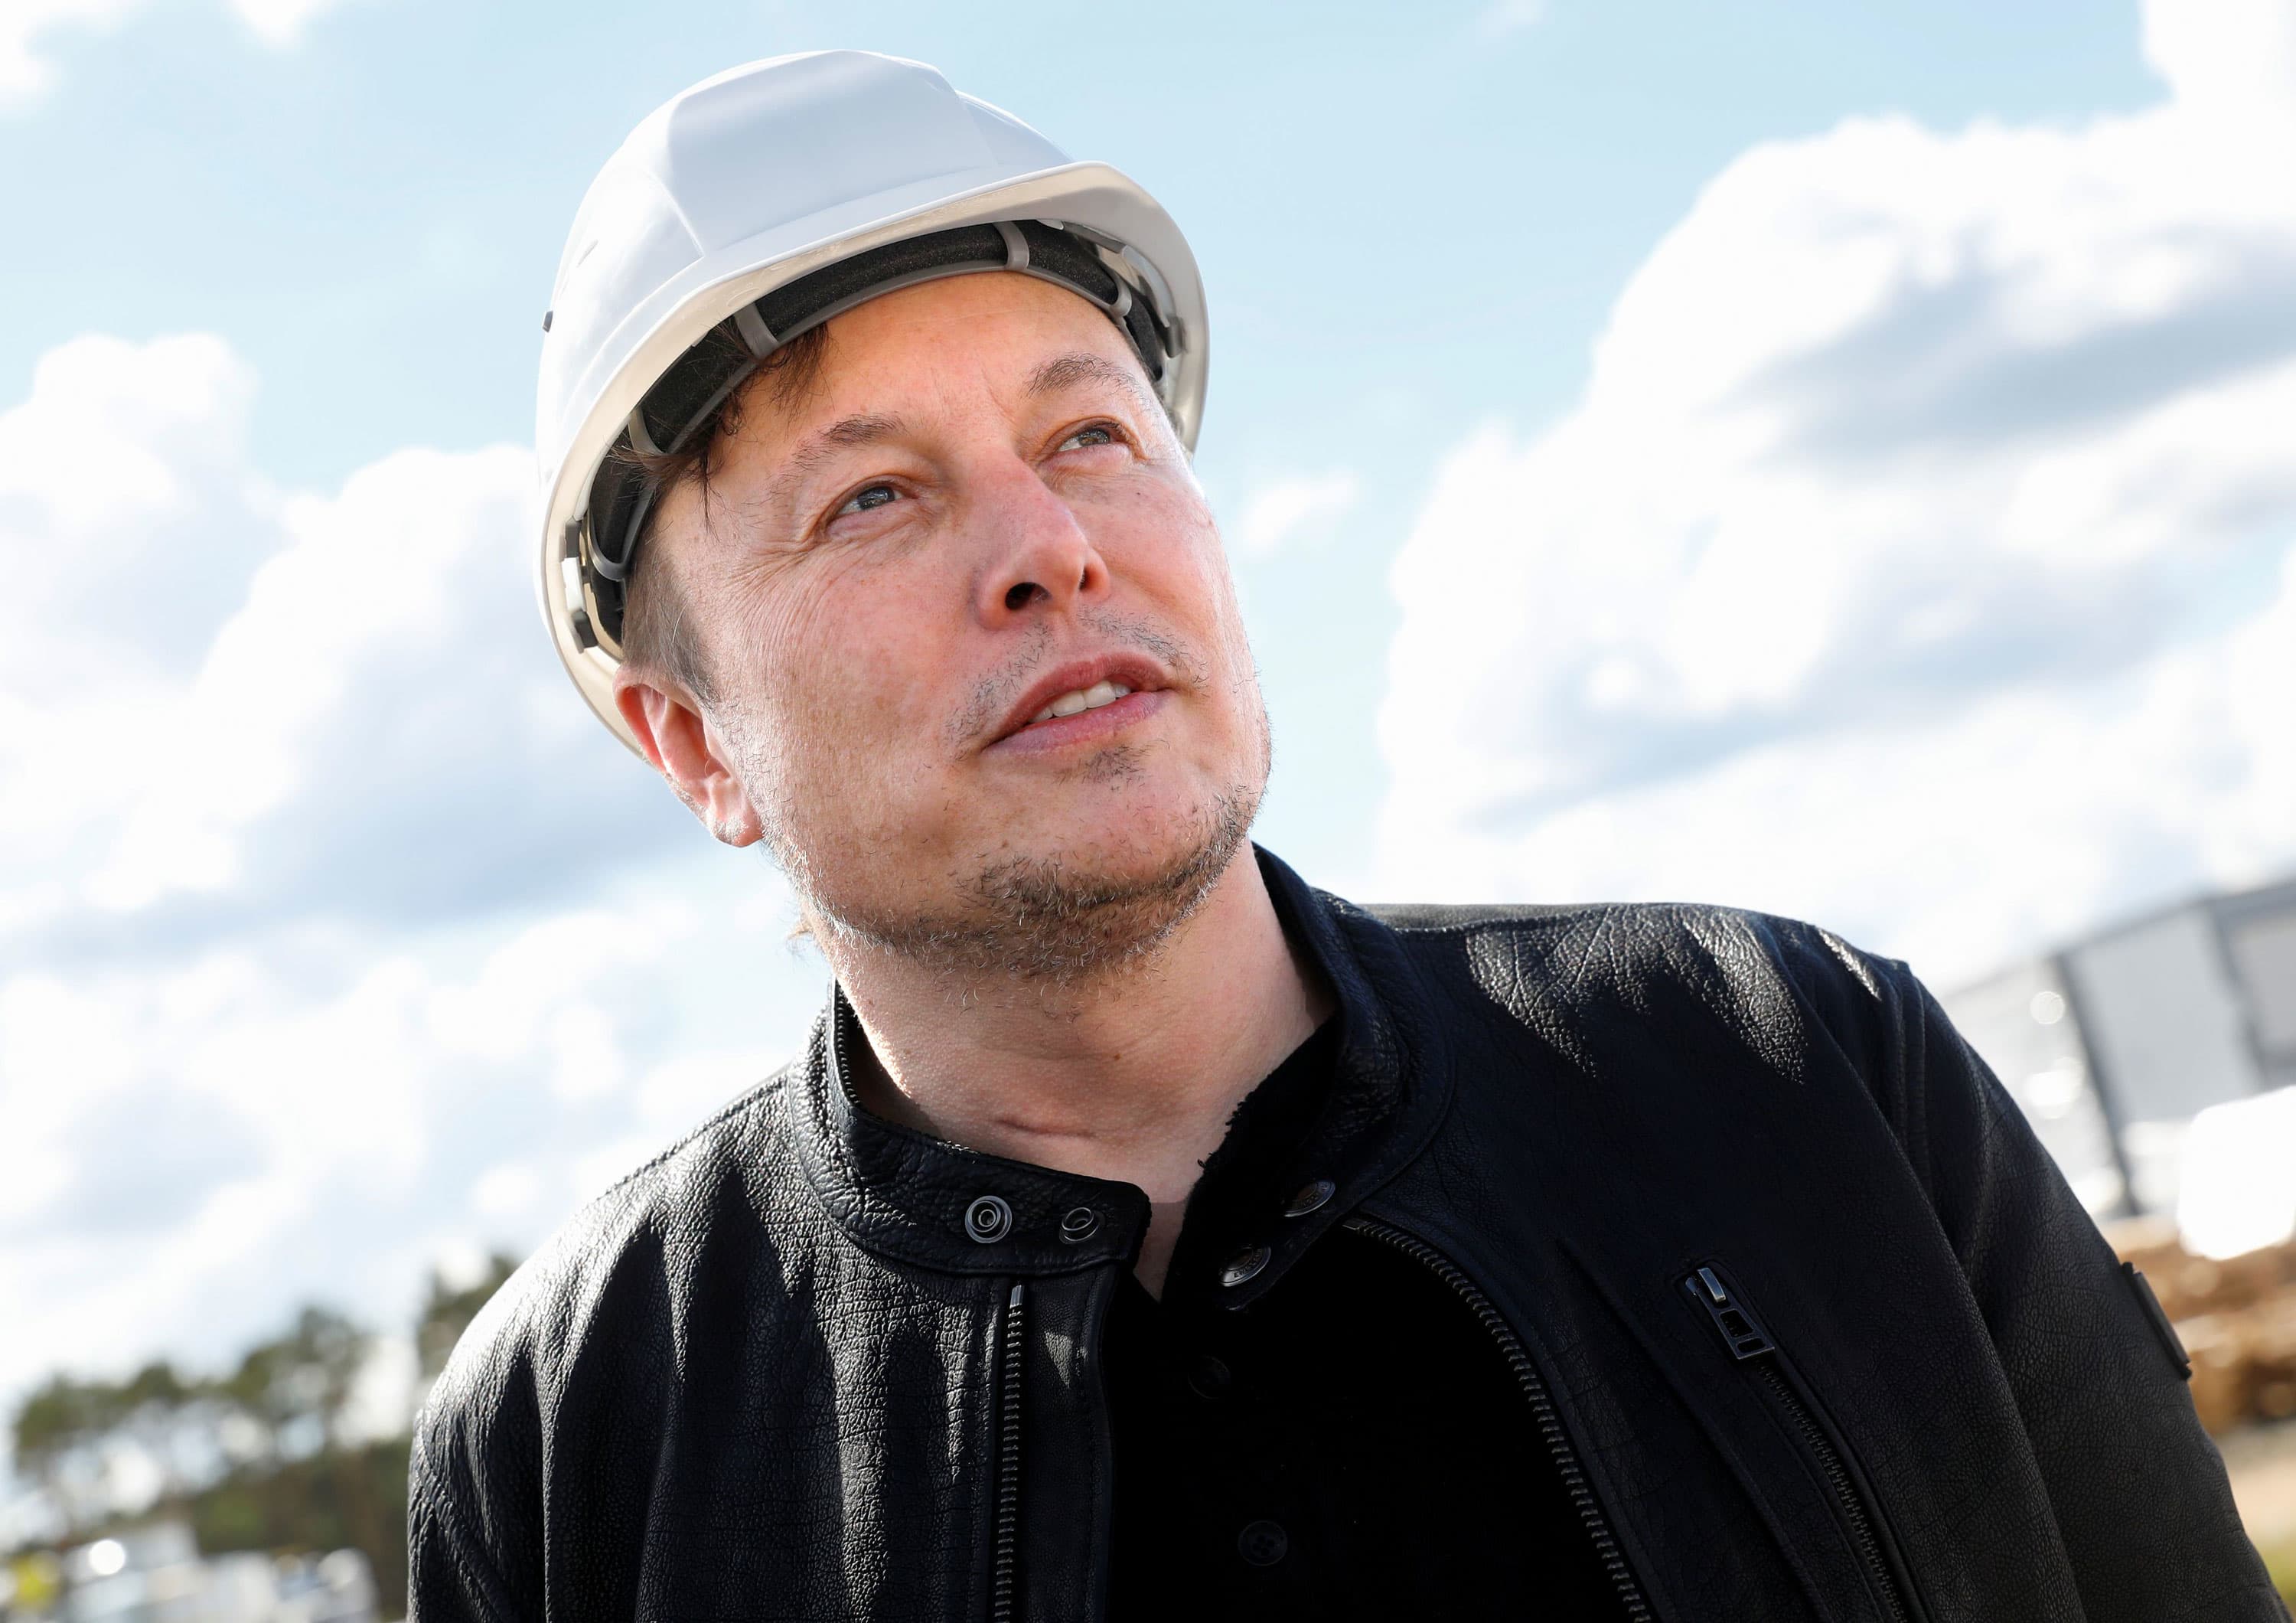 Taxes aren’t the only reason Elon Musk is selling Tesla stock